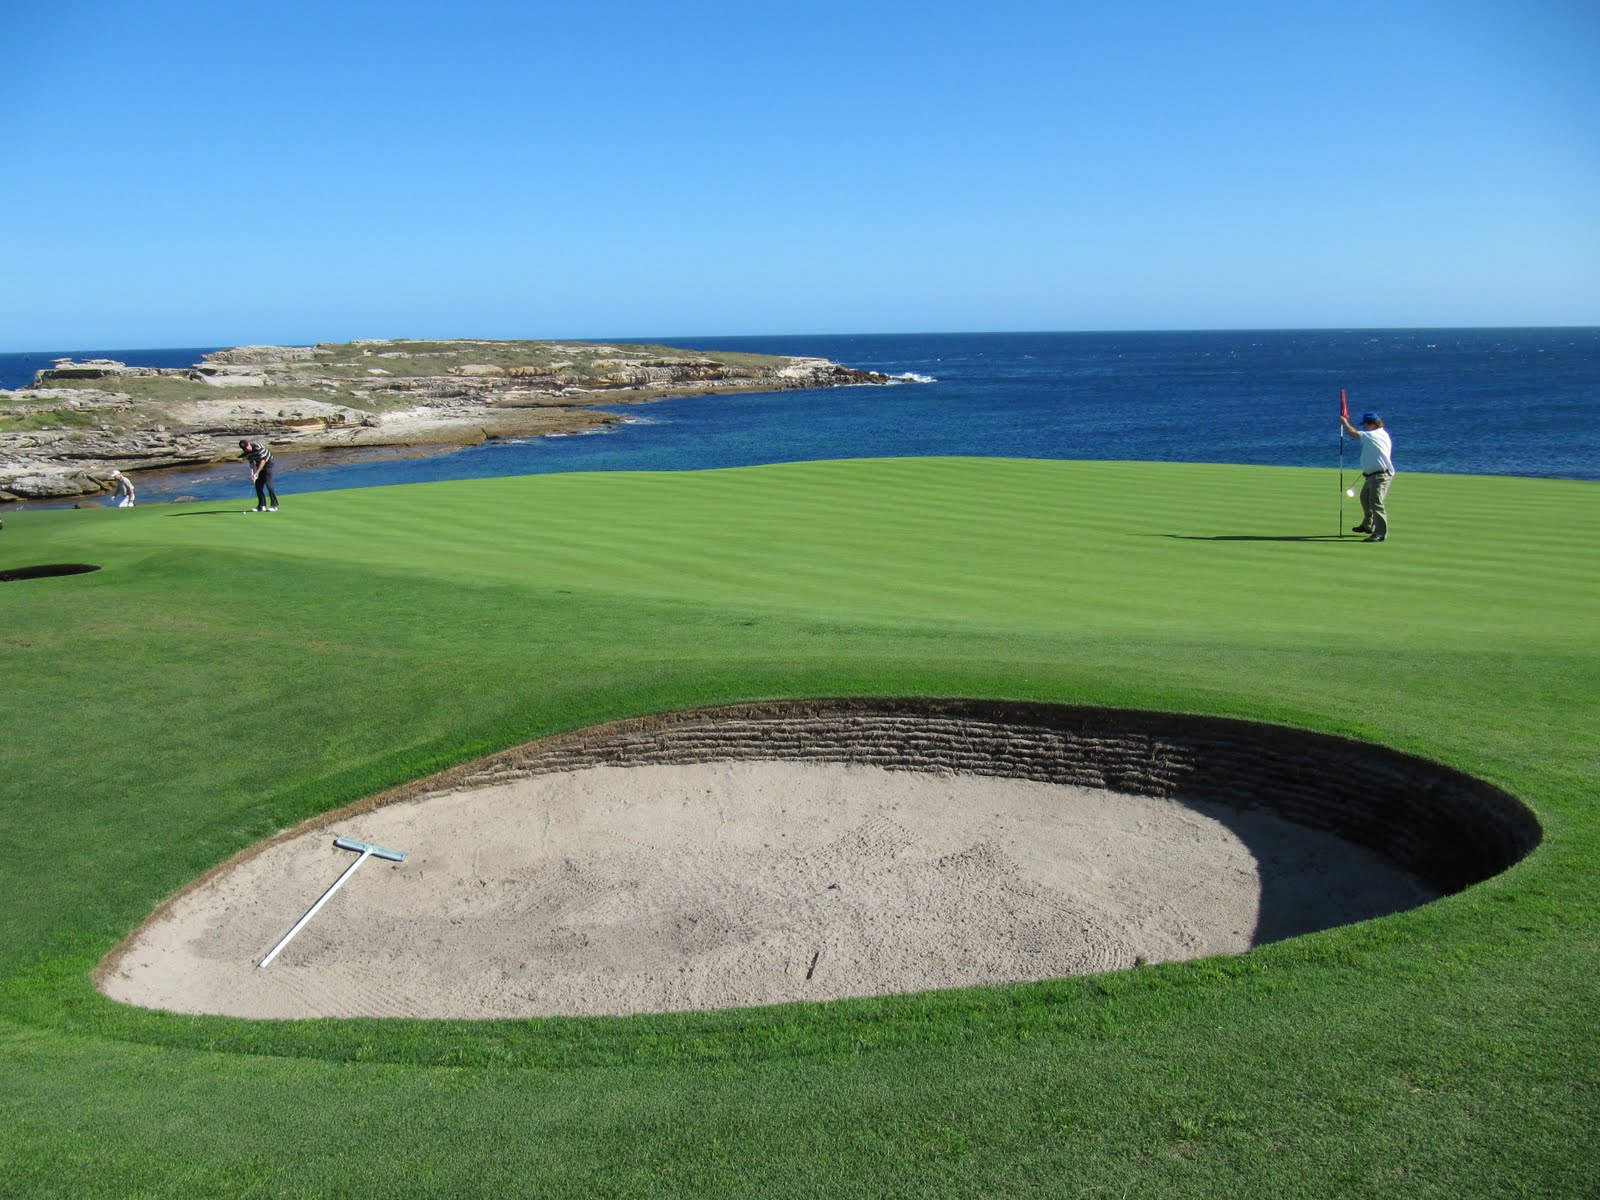 NSW Golf Club - La Perouse, New South Wales Golf - Course Tour